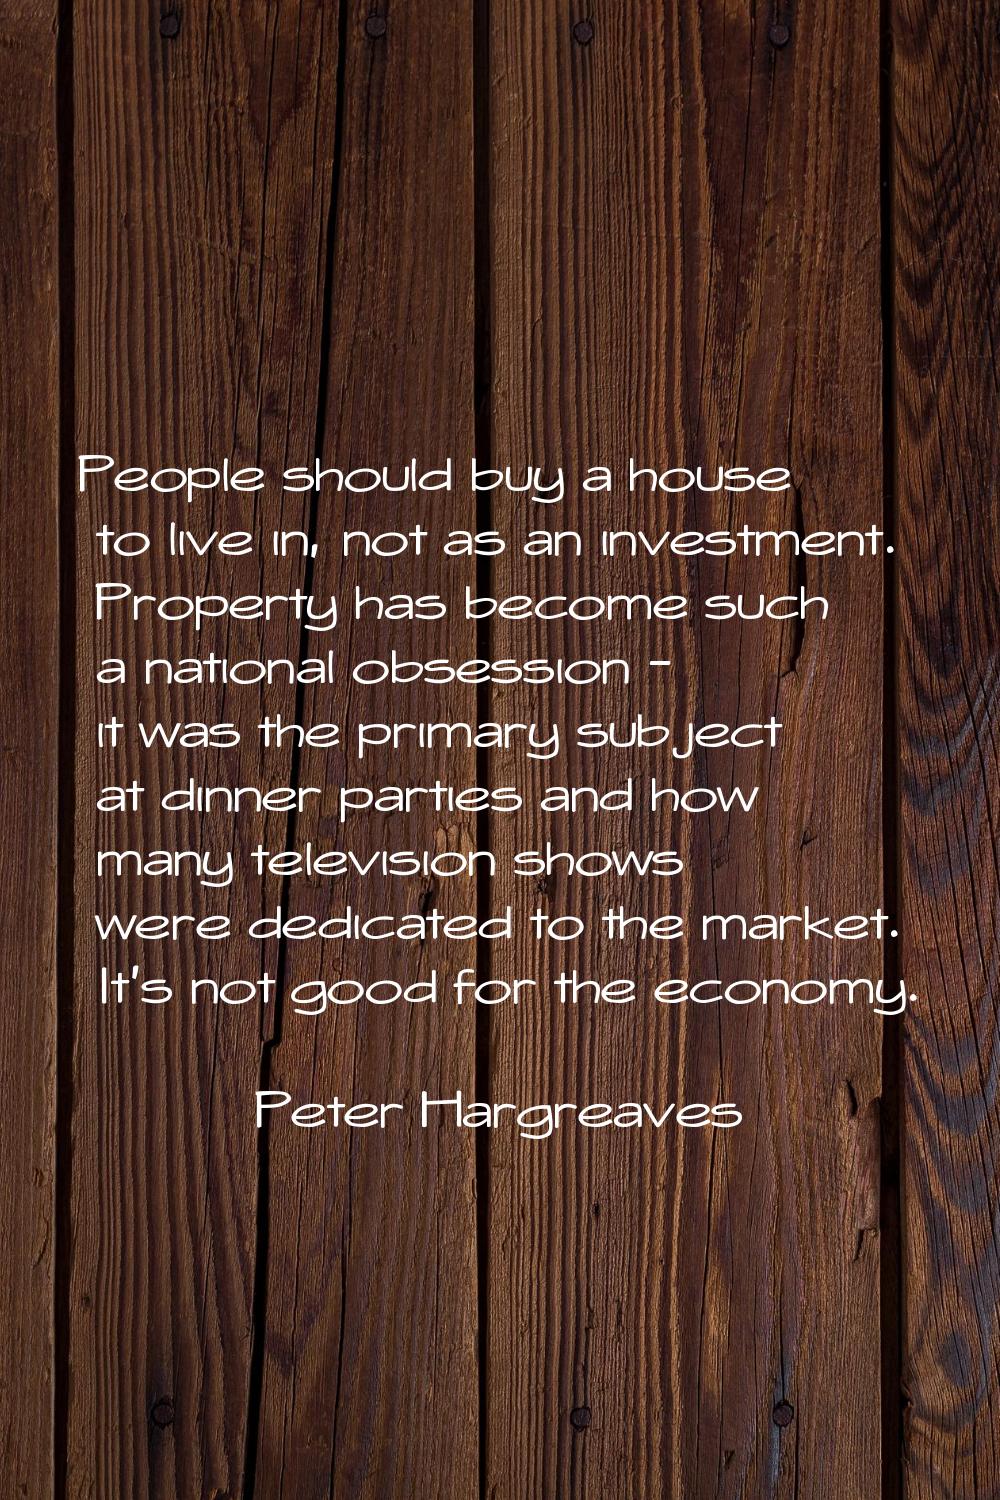 People should buy a house to live in, not as an investment. Property has become such a national obs